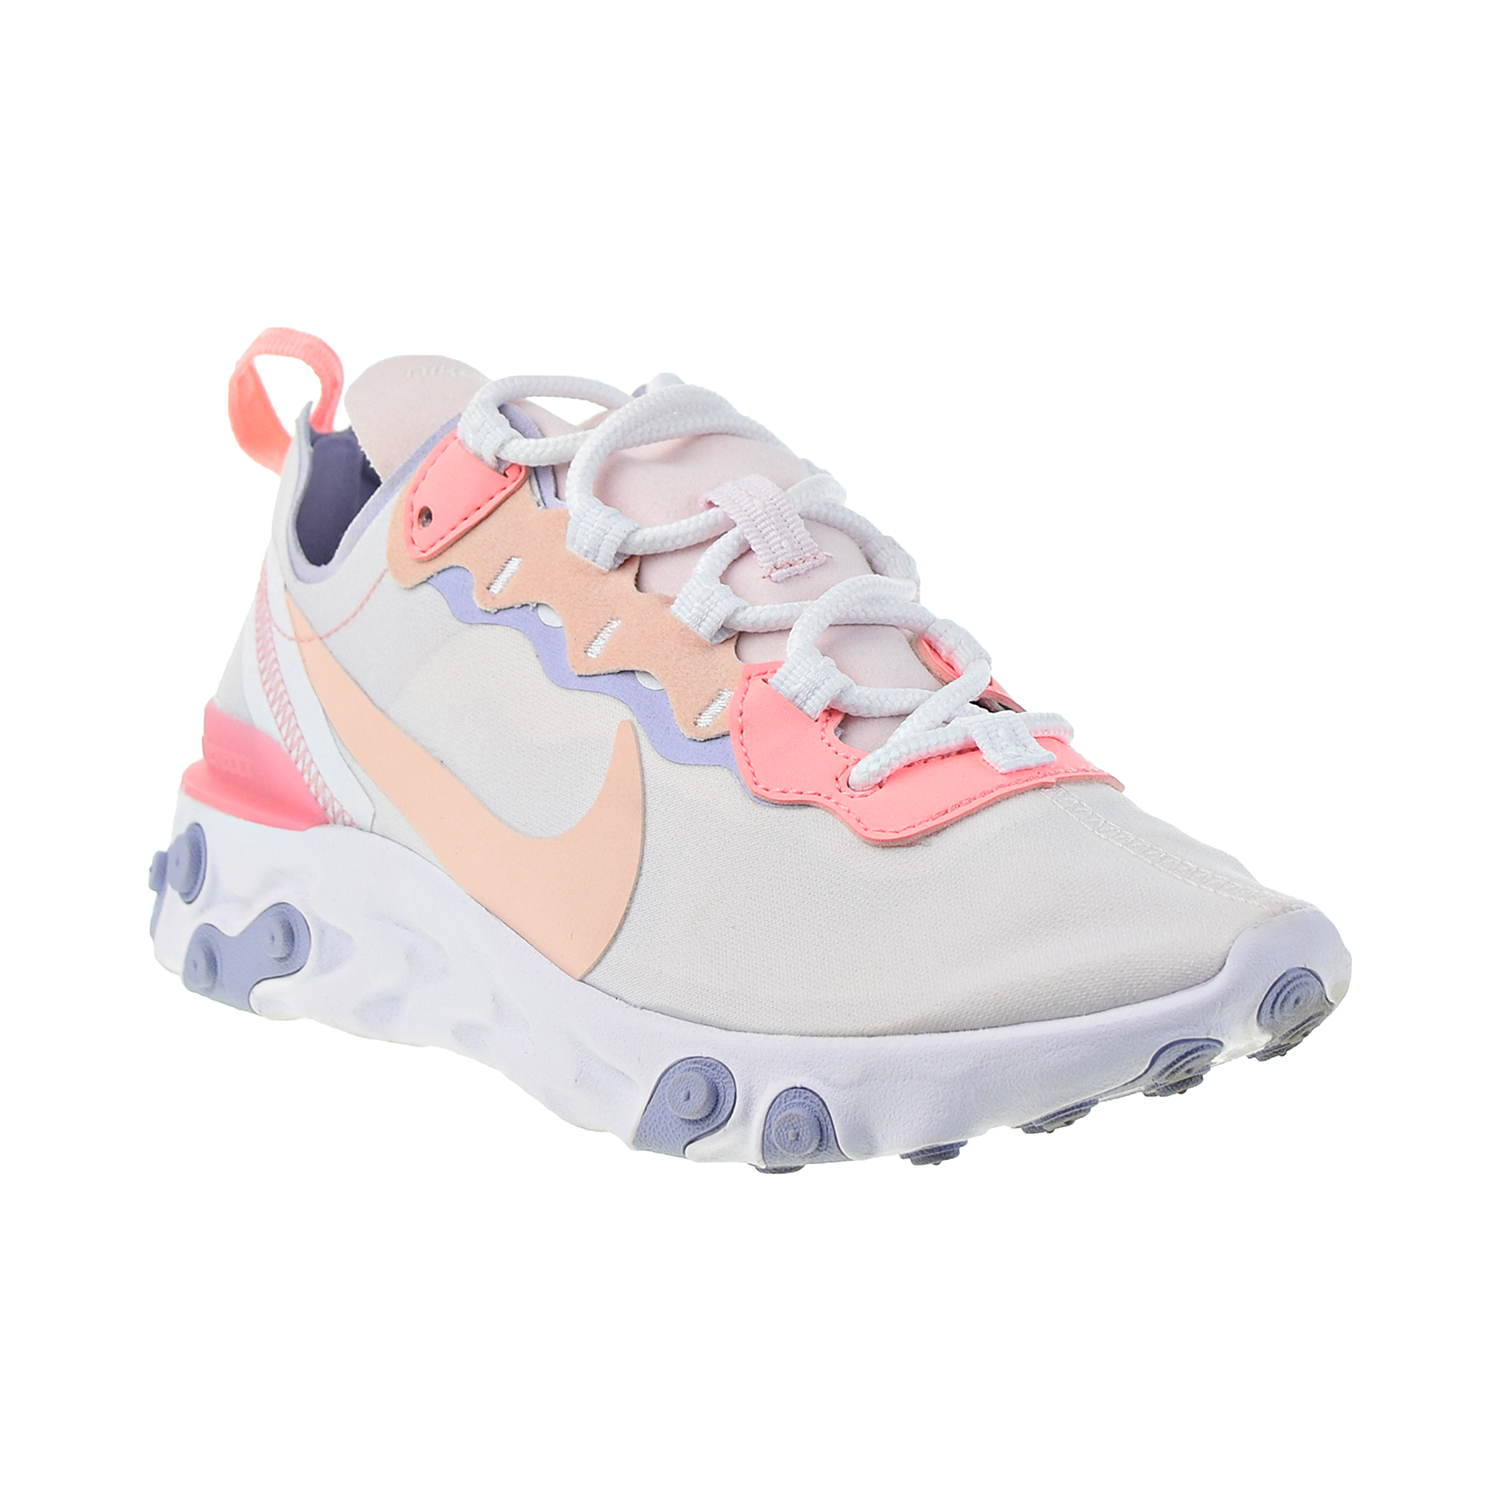 Nike React Element 55 Women's Shoes Pale Pink-Washed Coral bq2728-601